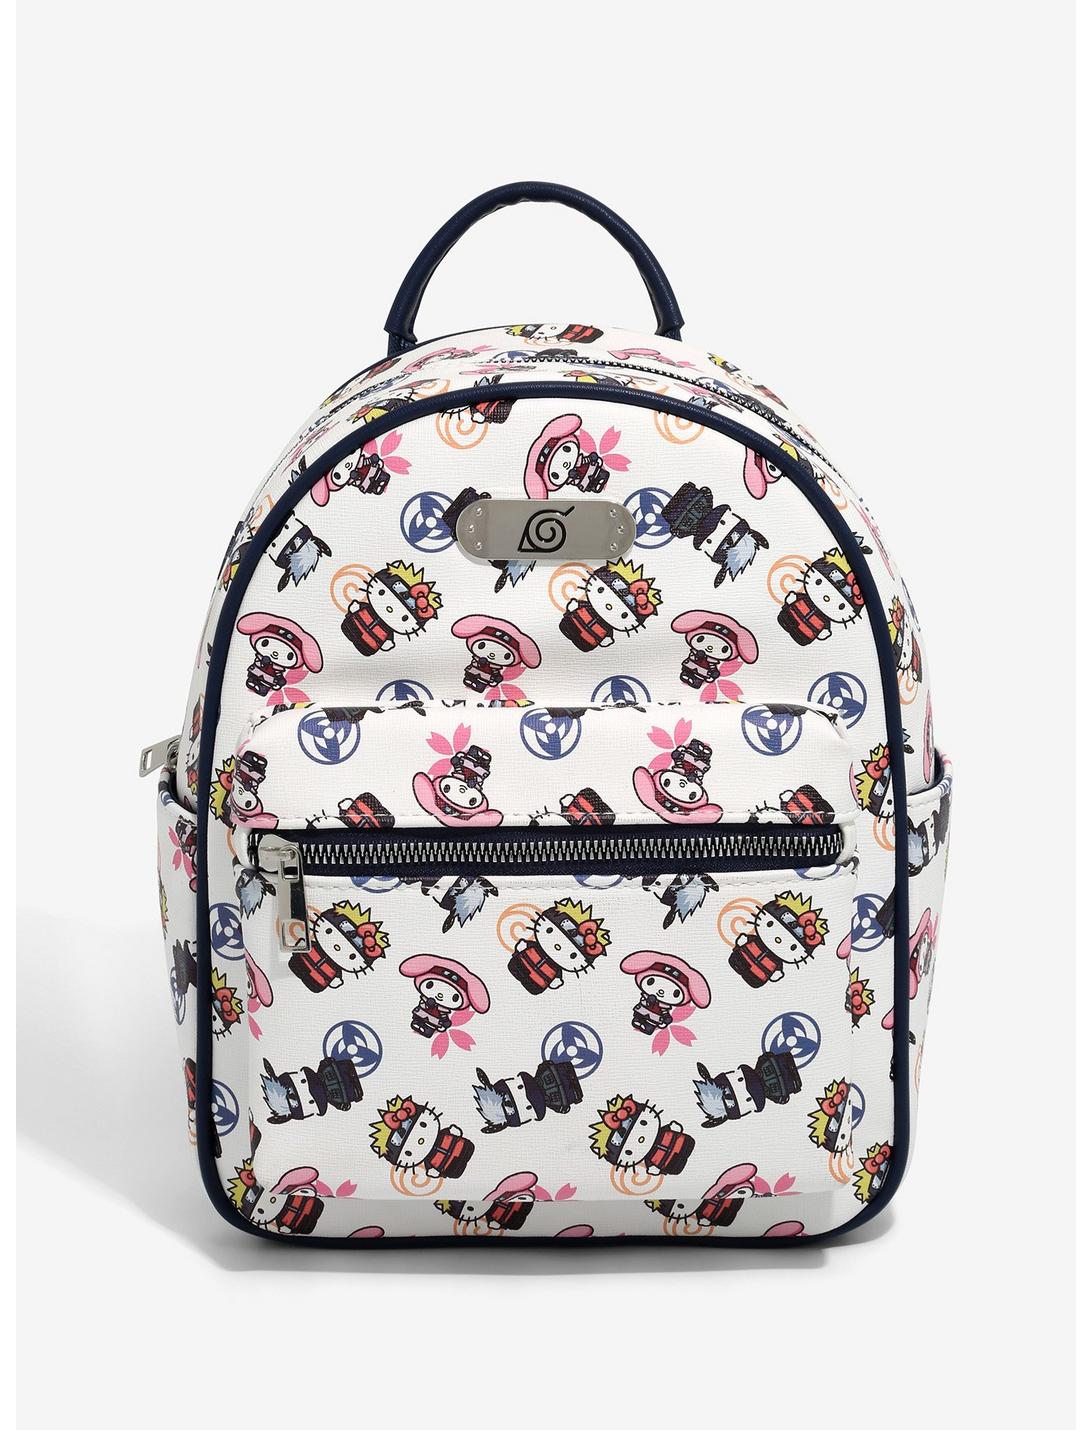 Naruto Shippuden x Hello Kitty and Friends Allover Print Mini Backpack - BoxLunch Exclusive, , hi-res